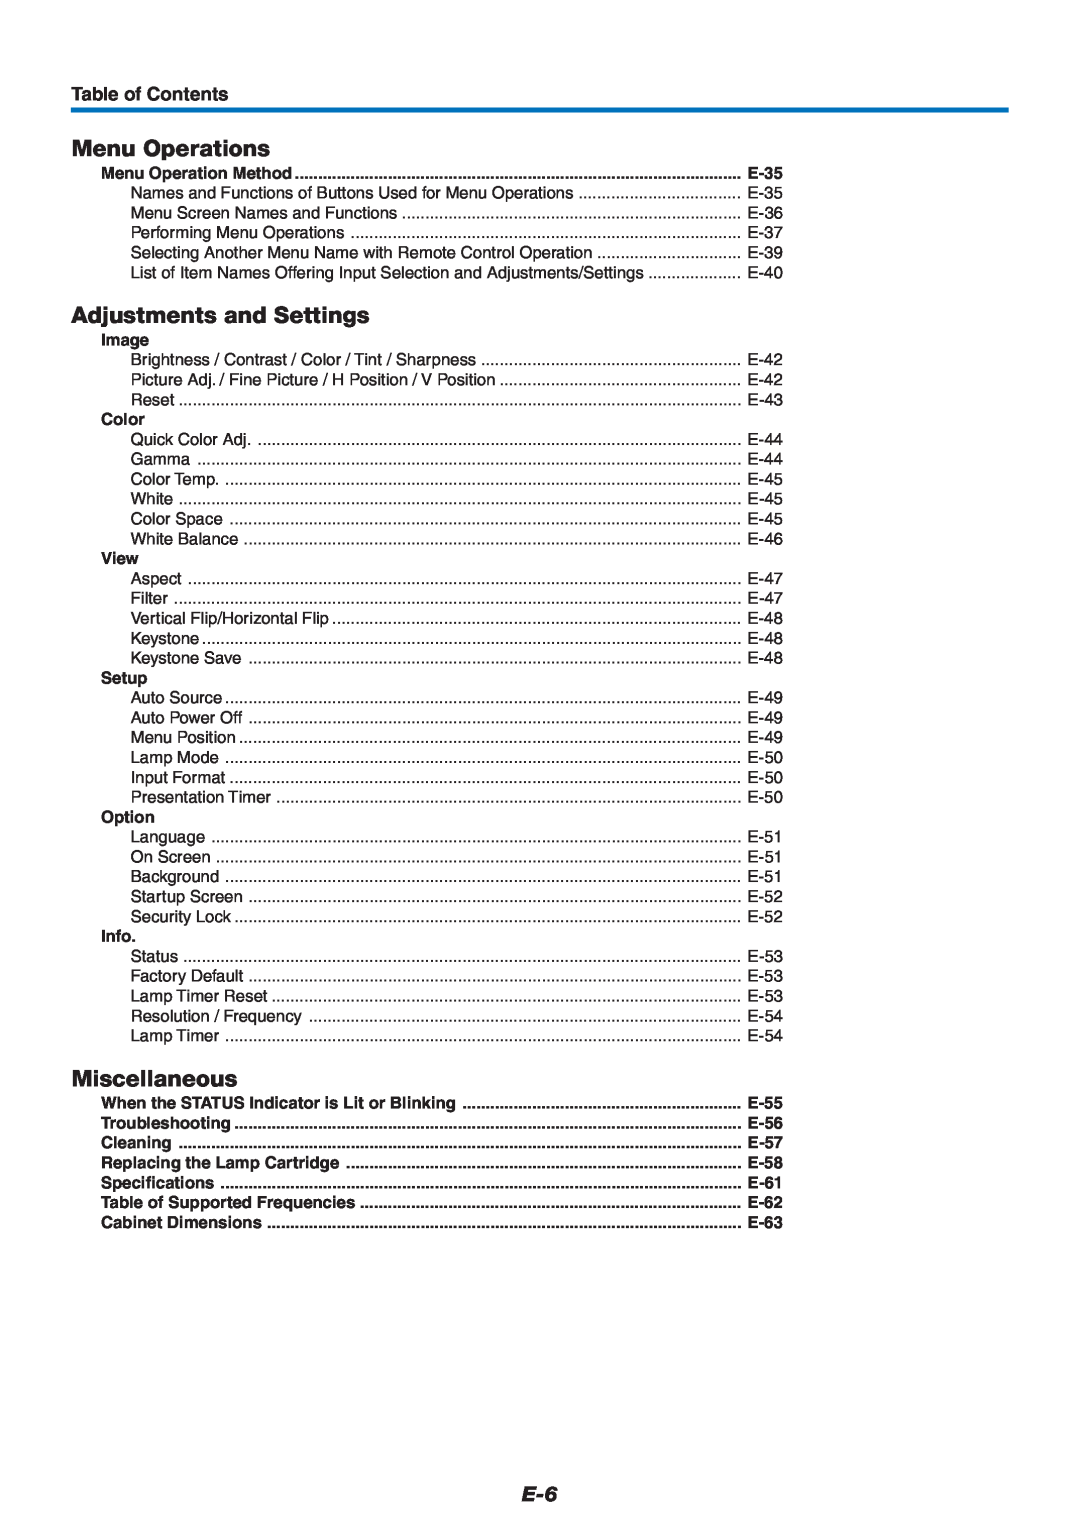 PLUS Vision U4-232 Menu Operations, Adjustments and Settings, Miscellaneous, Table of Contents, E-35, Image, Color, View 